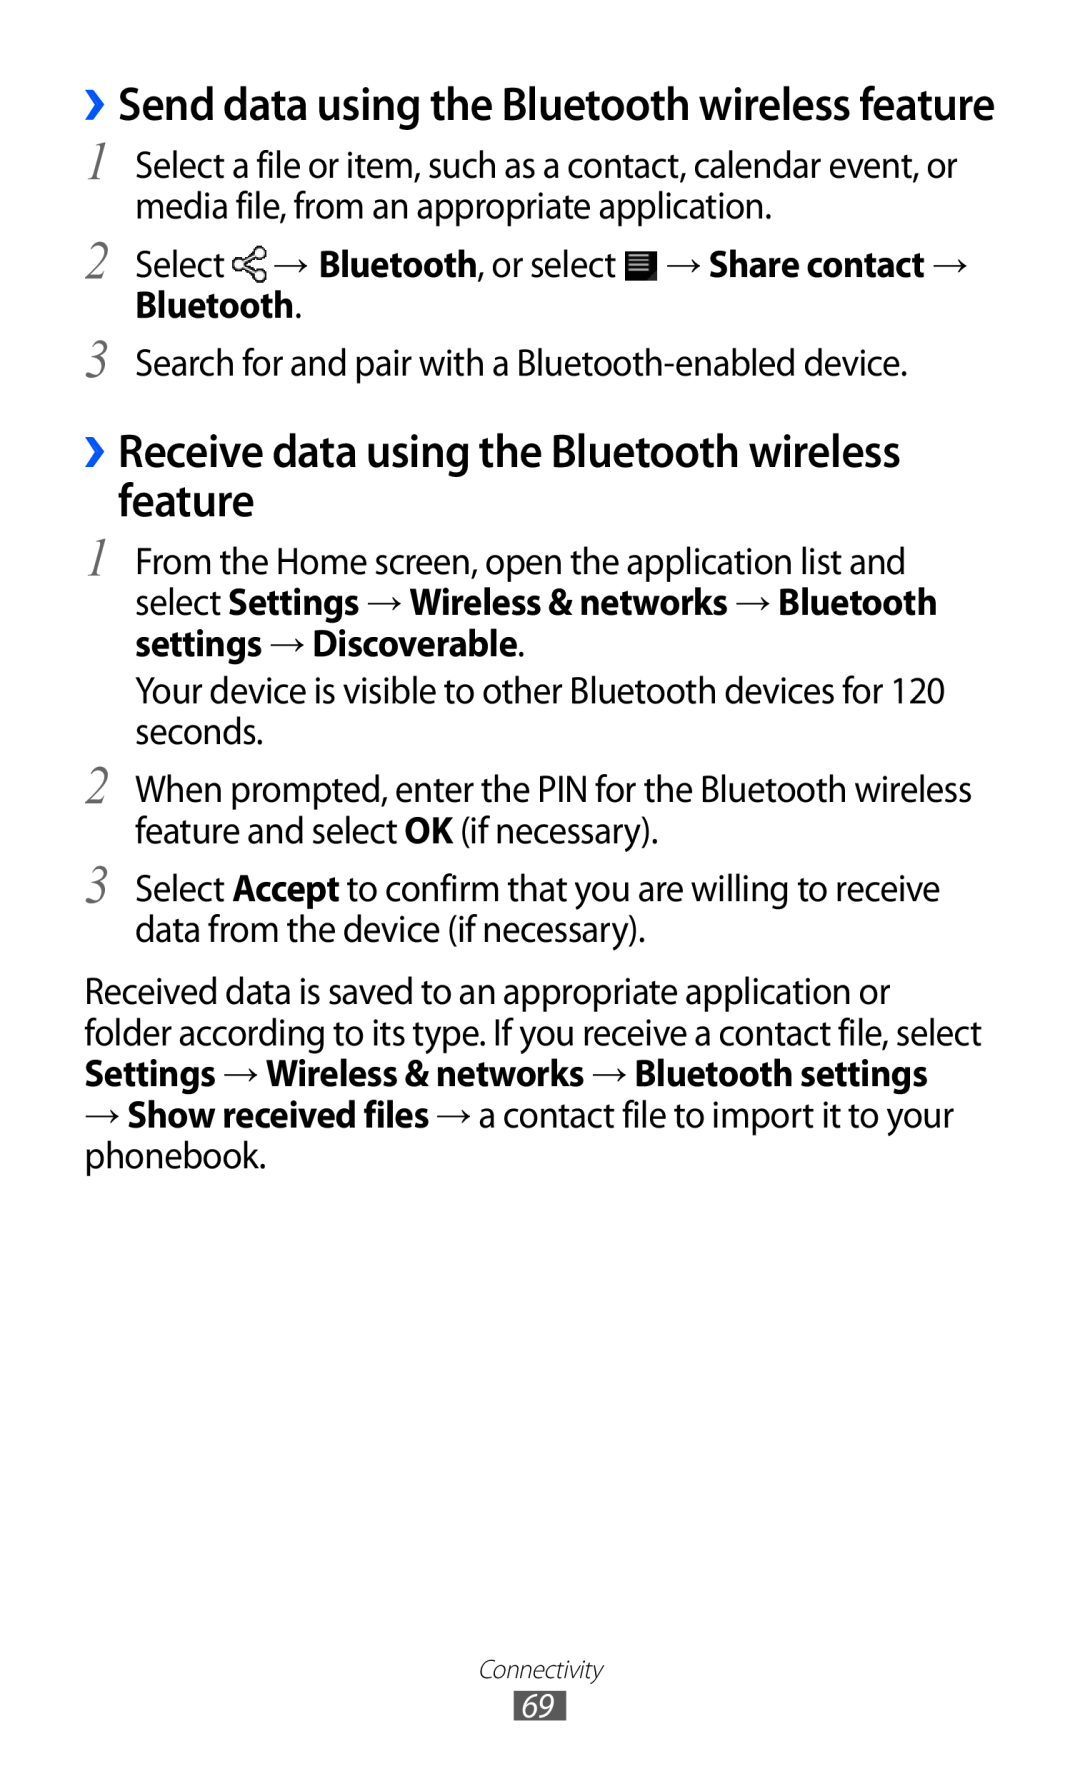 Samsung GT-P7510 ››Receive data using the Bluetooth wireless feature, ››Send data using the Bluetooth wireless feature 